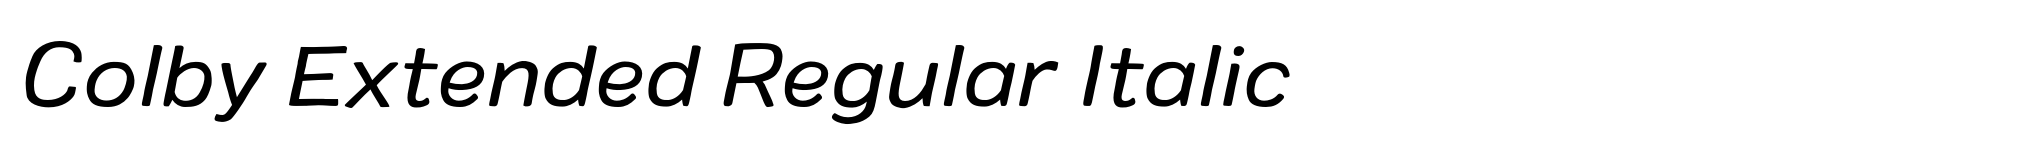 Colby Extended Regular Italic image